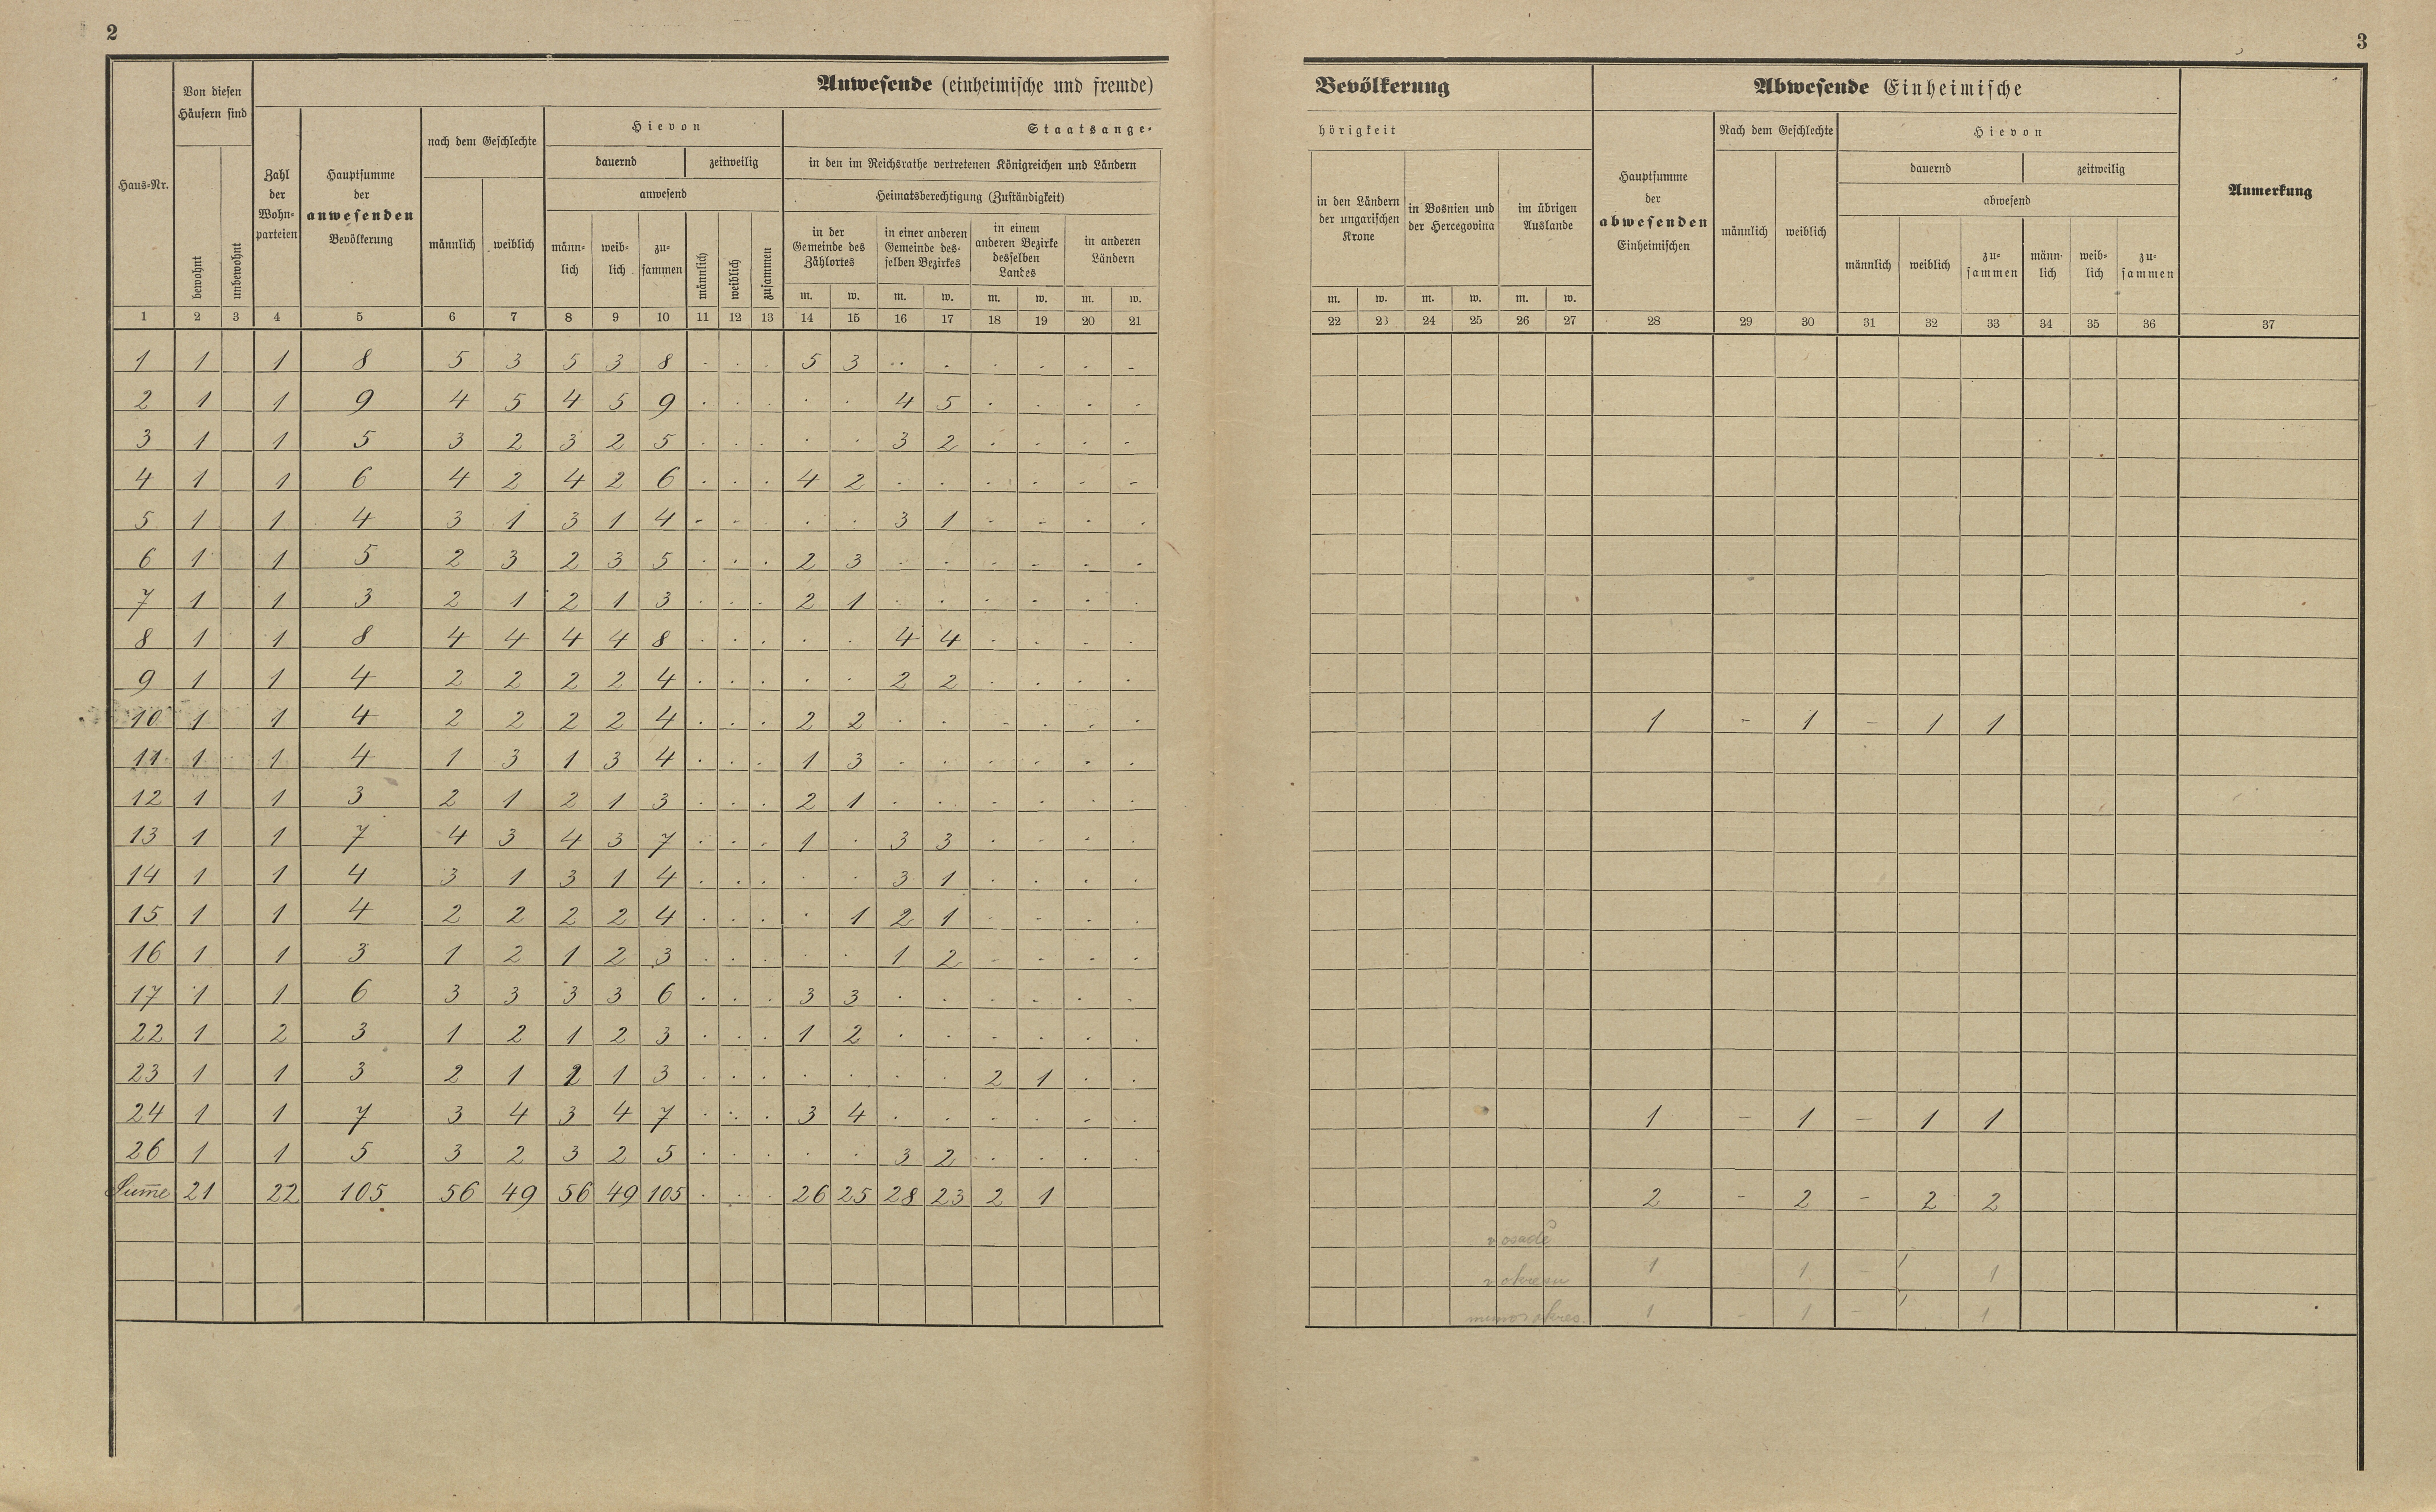 12. soap-ps_00423_census-sum-1900-odlezly-i0883_0120